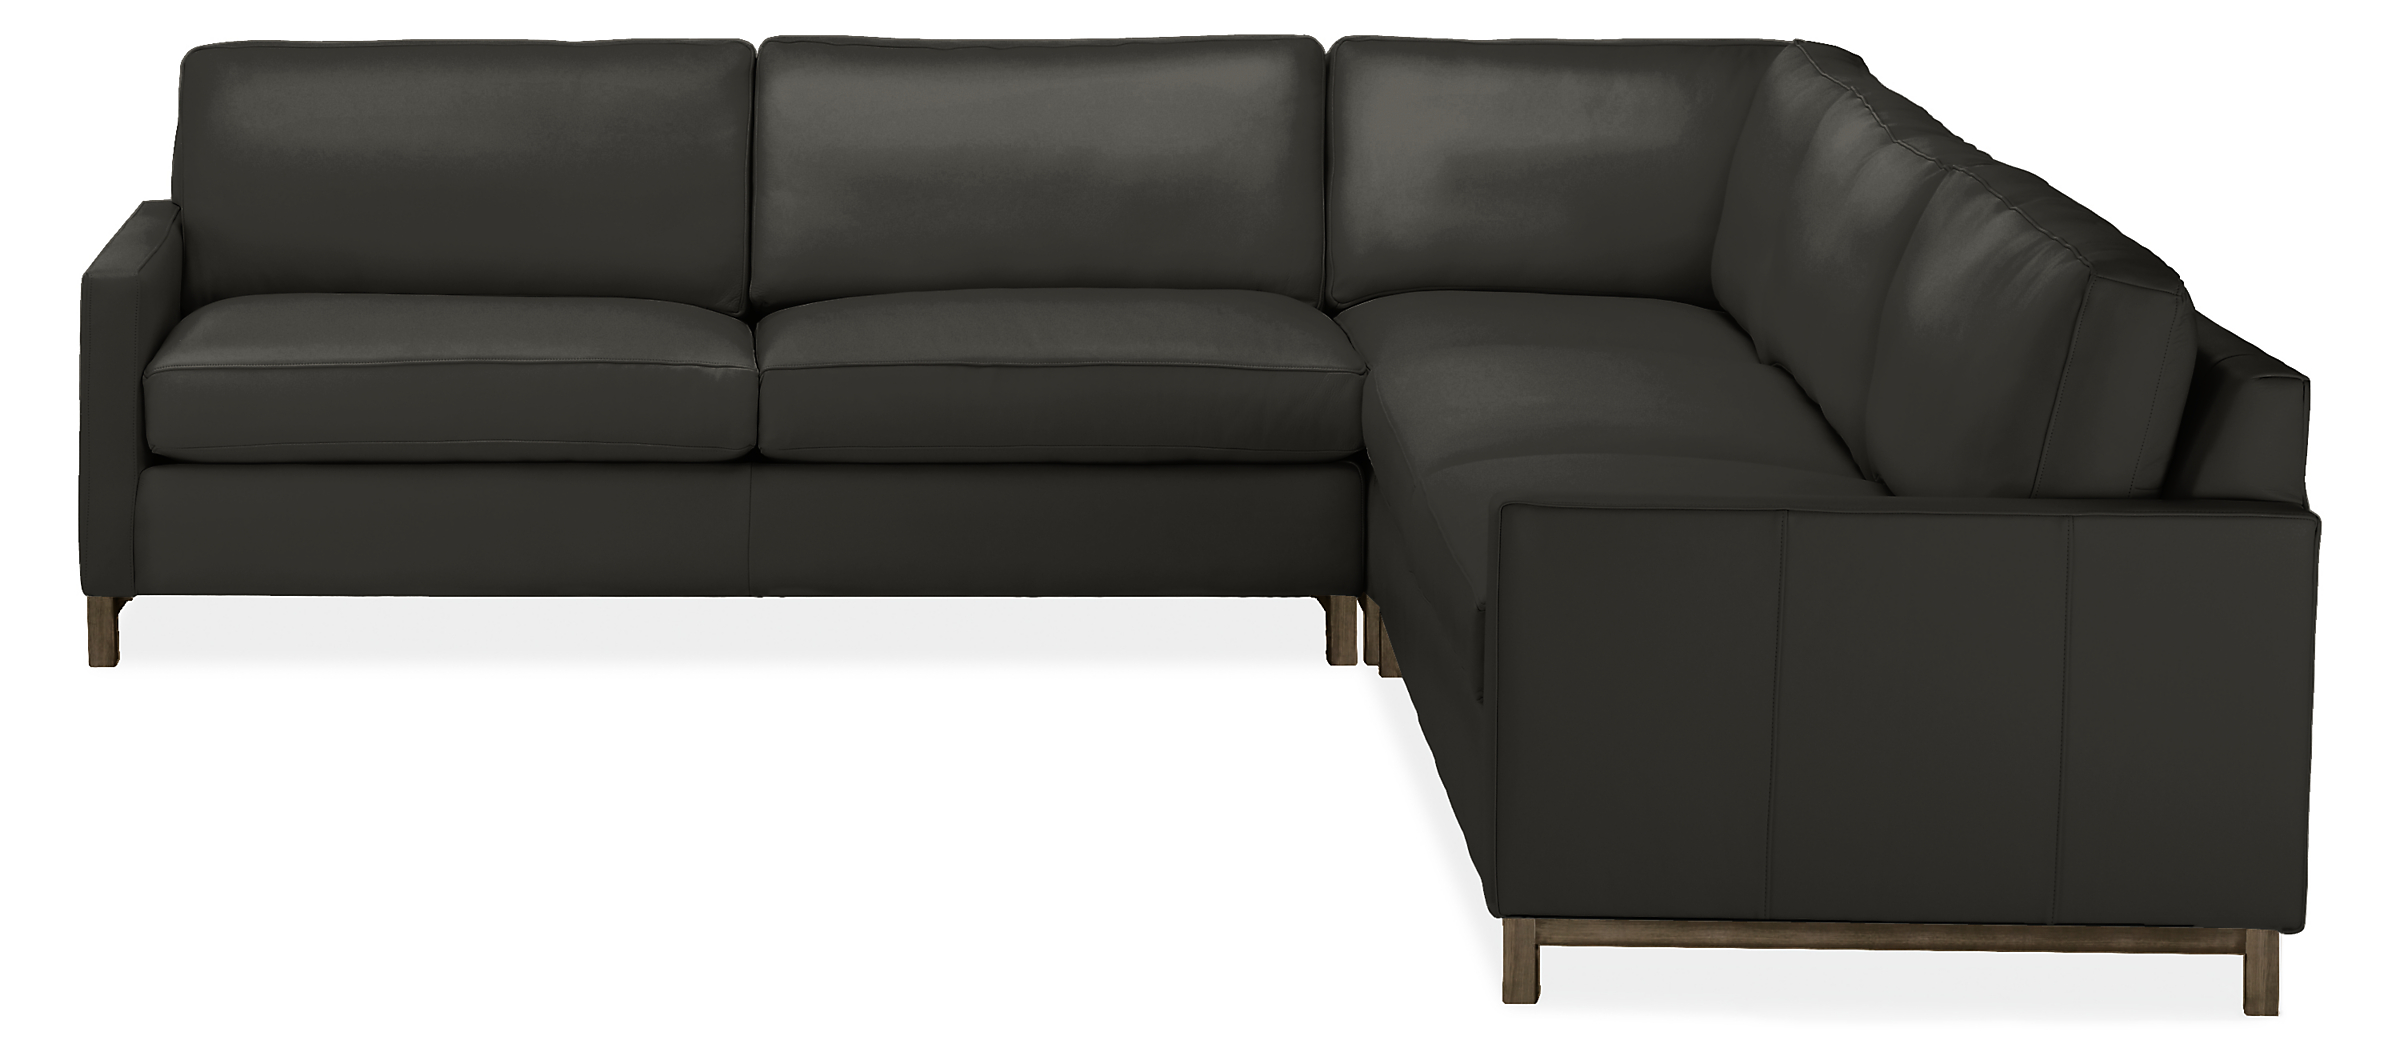 Stevens Leather Sectionals